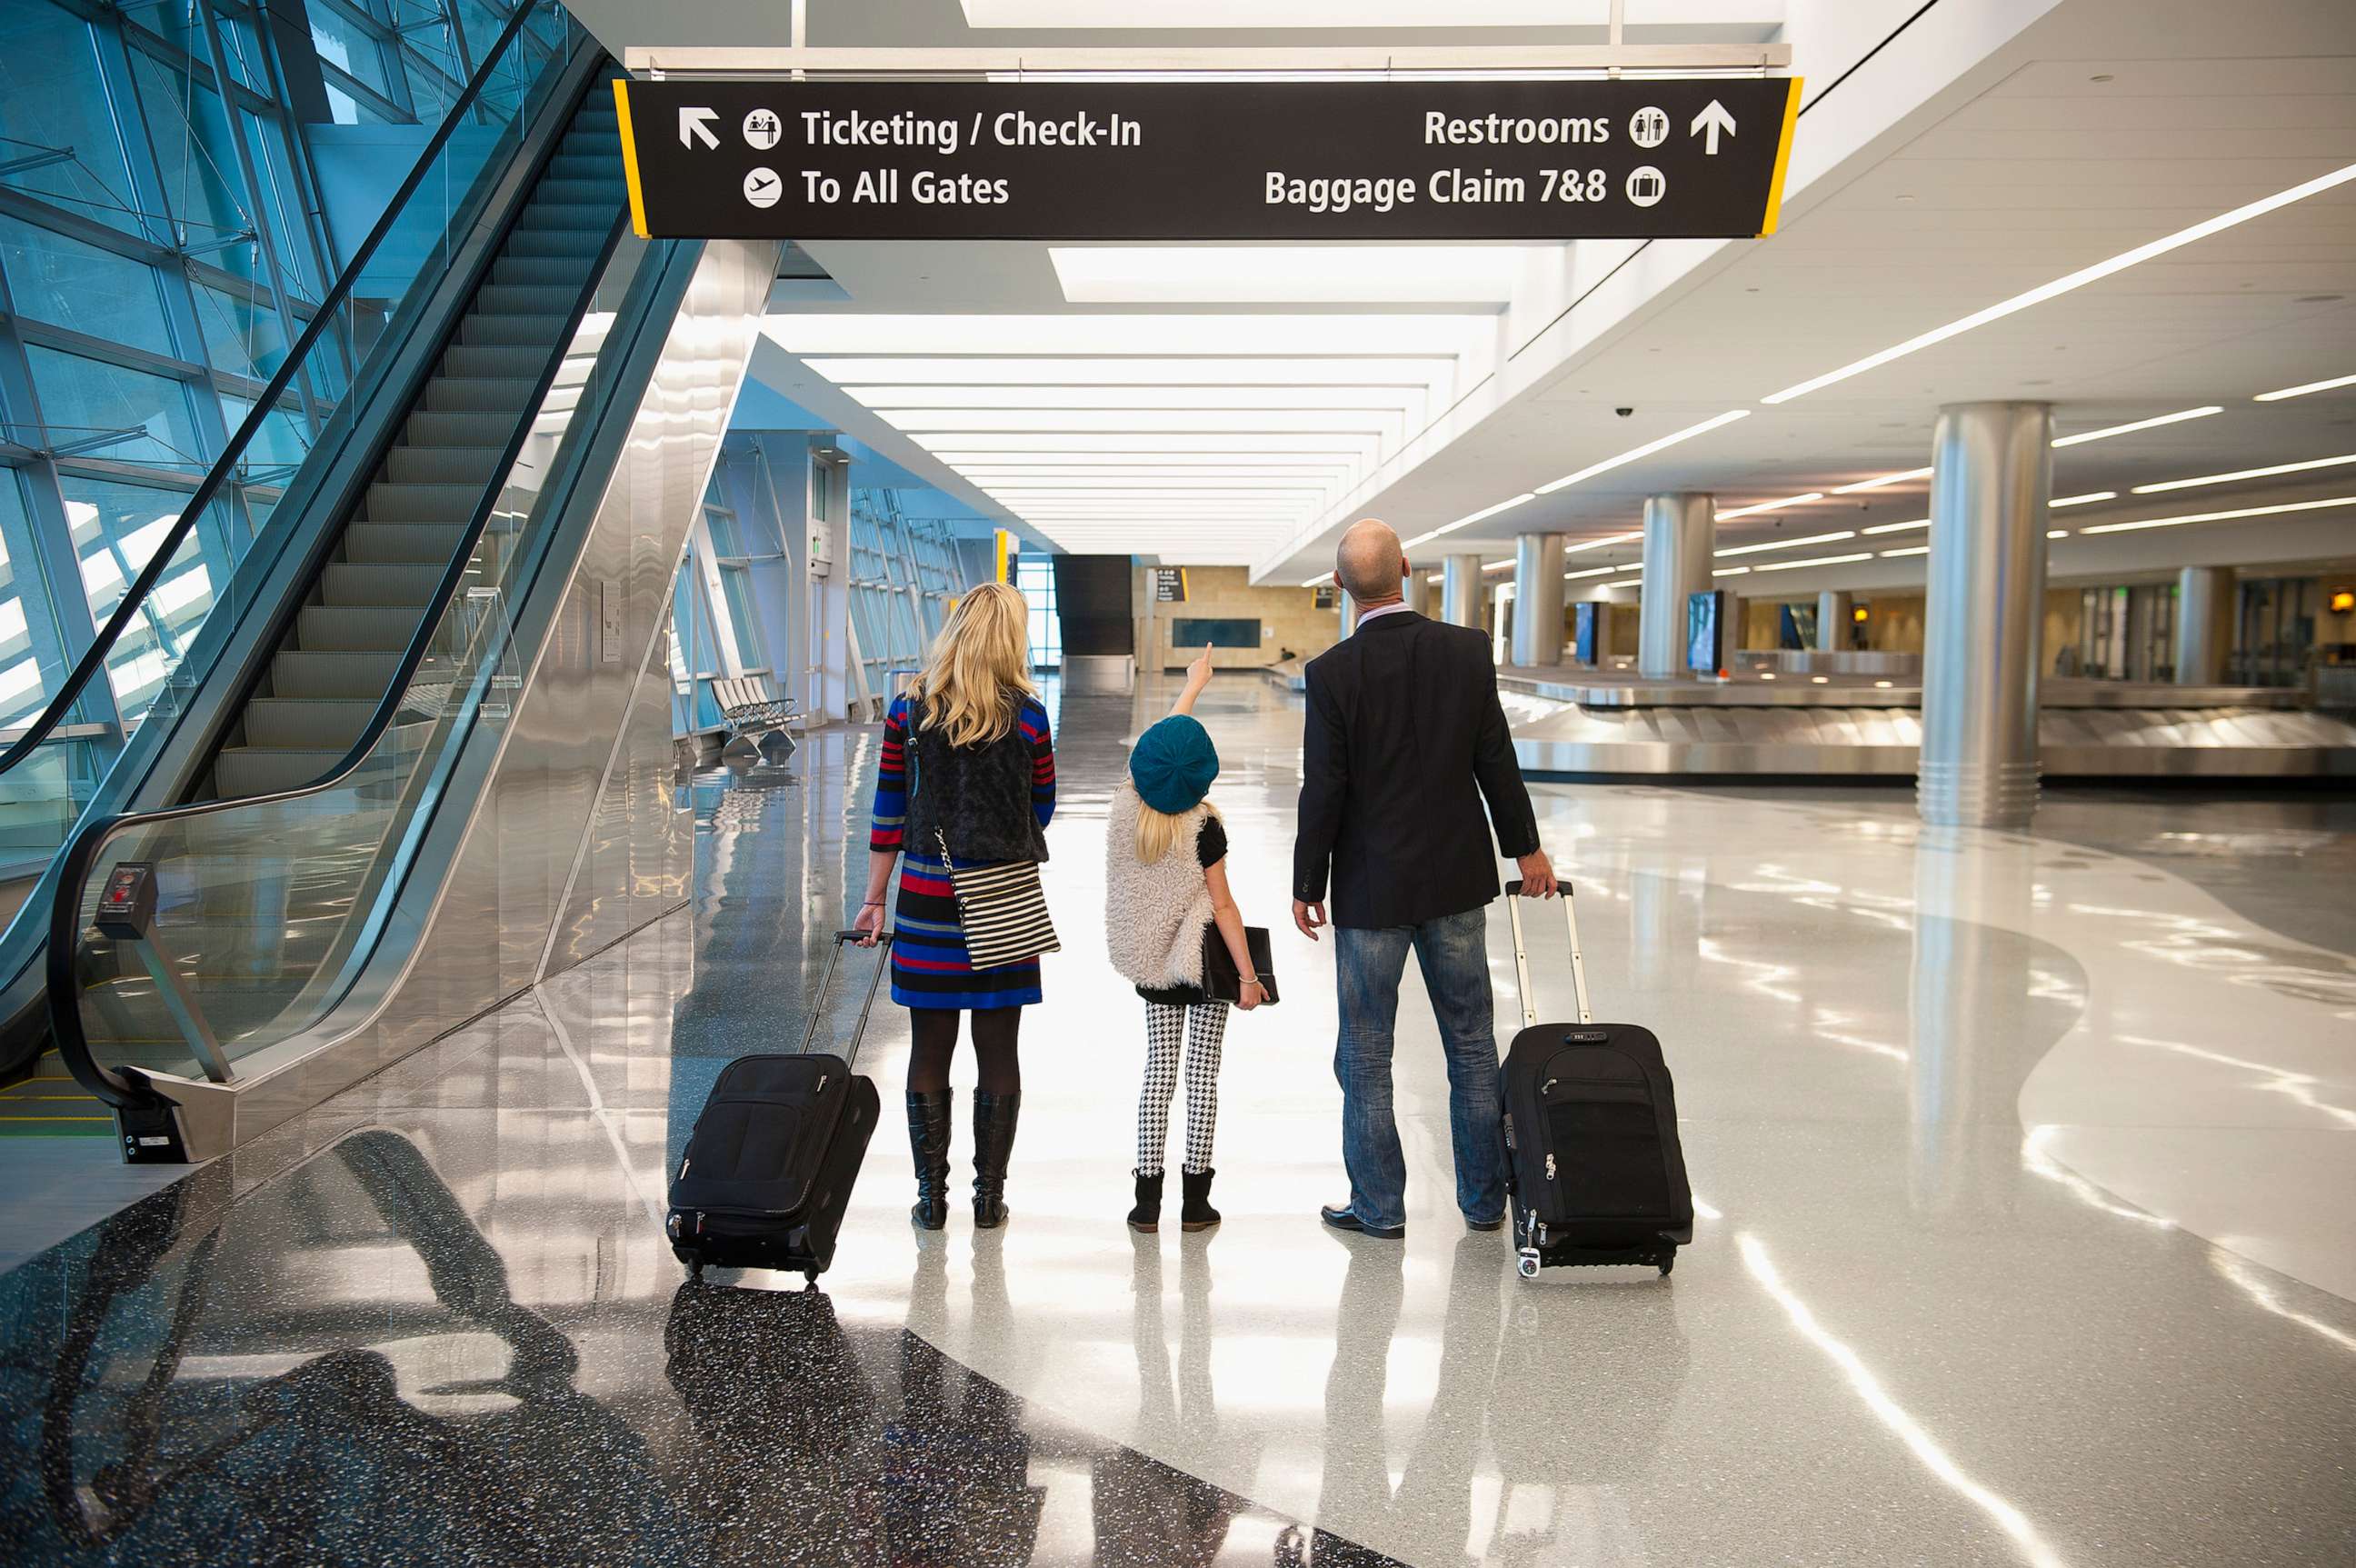 PHOTO: A stock photo shows a family together at an airport.